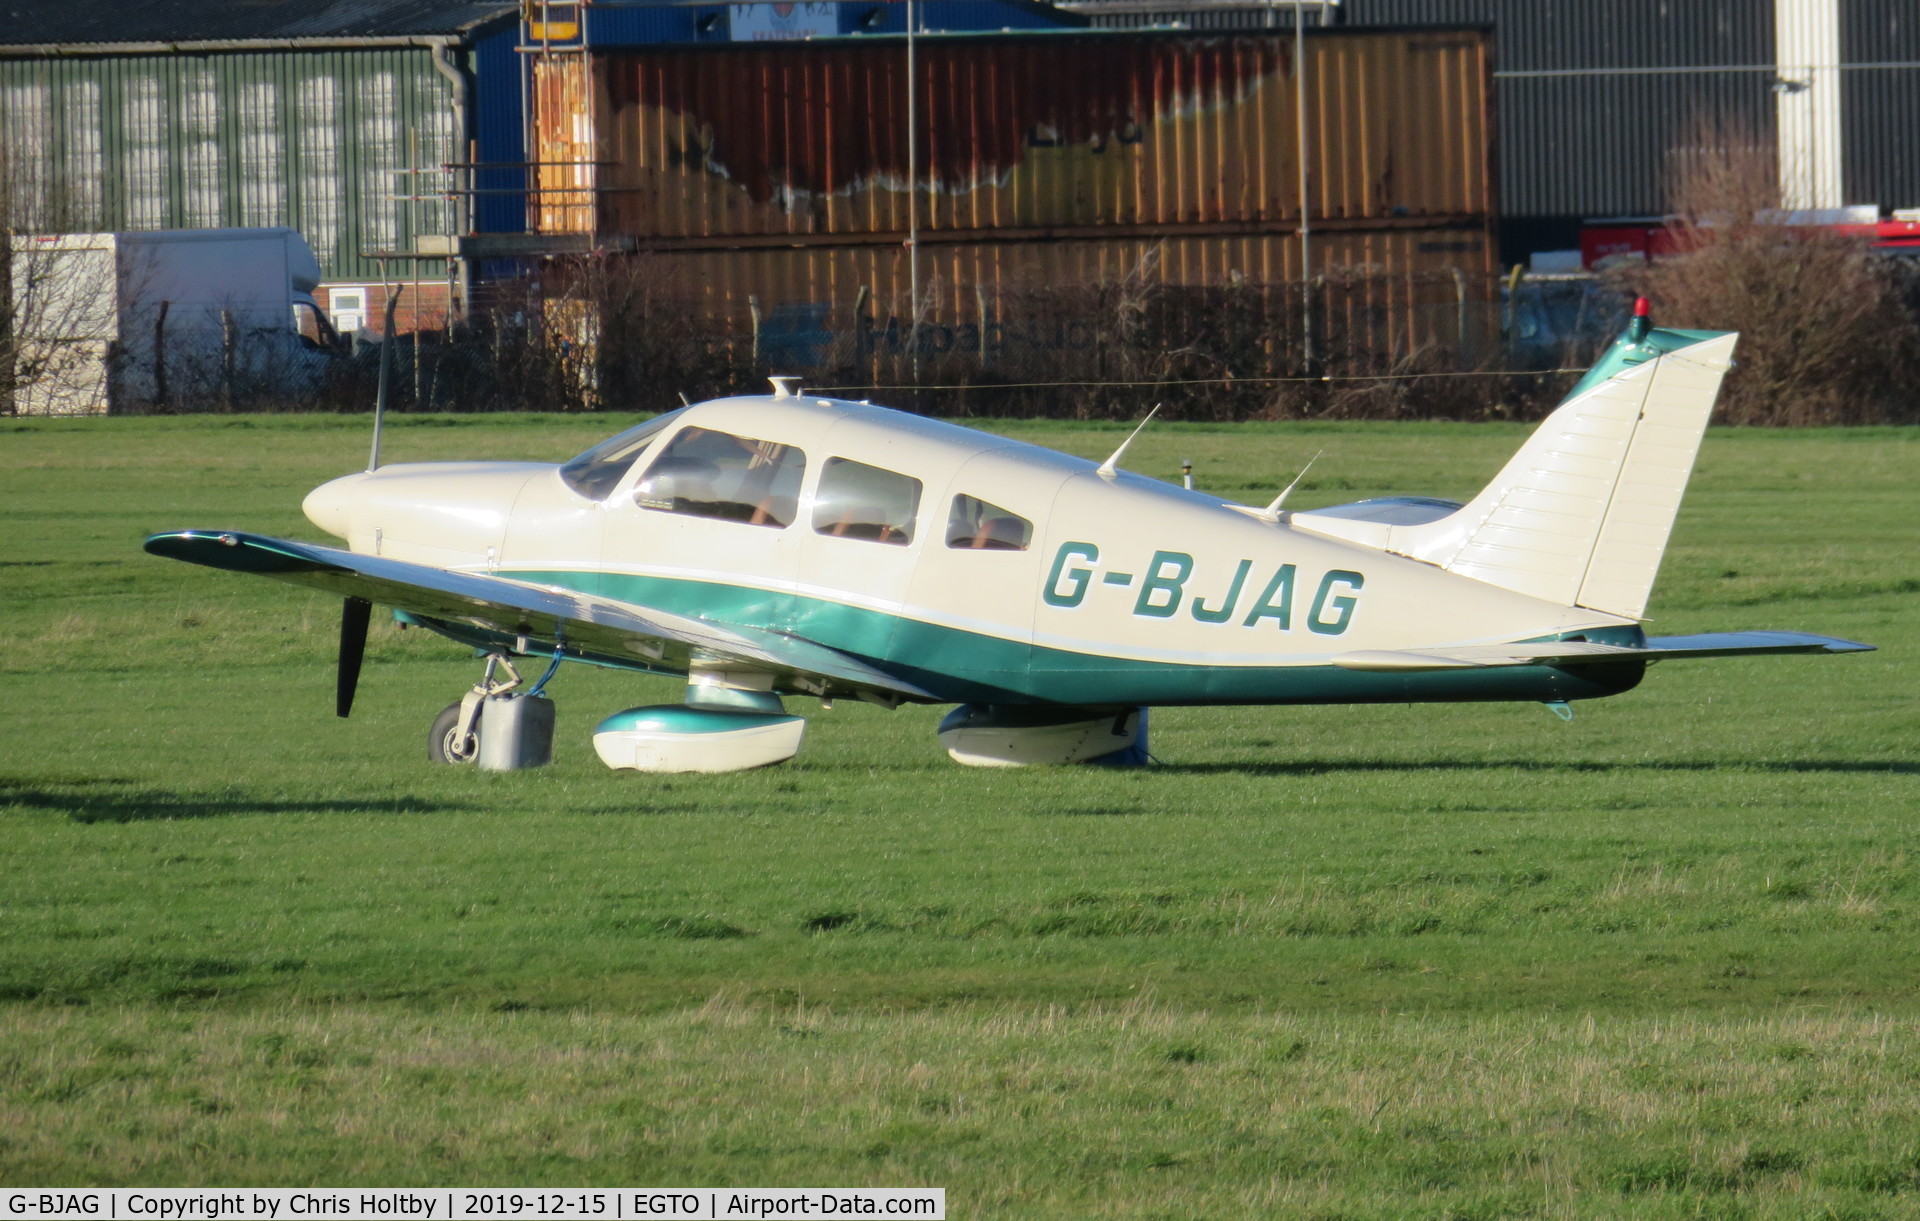 G-BJAG, 1979 Piper PA-28-181 Cherokee Archer II C/N 28-7990353, Parked at Rochester Airport, Kent in some wintry sun